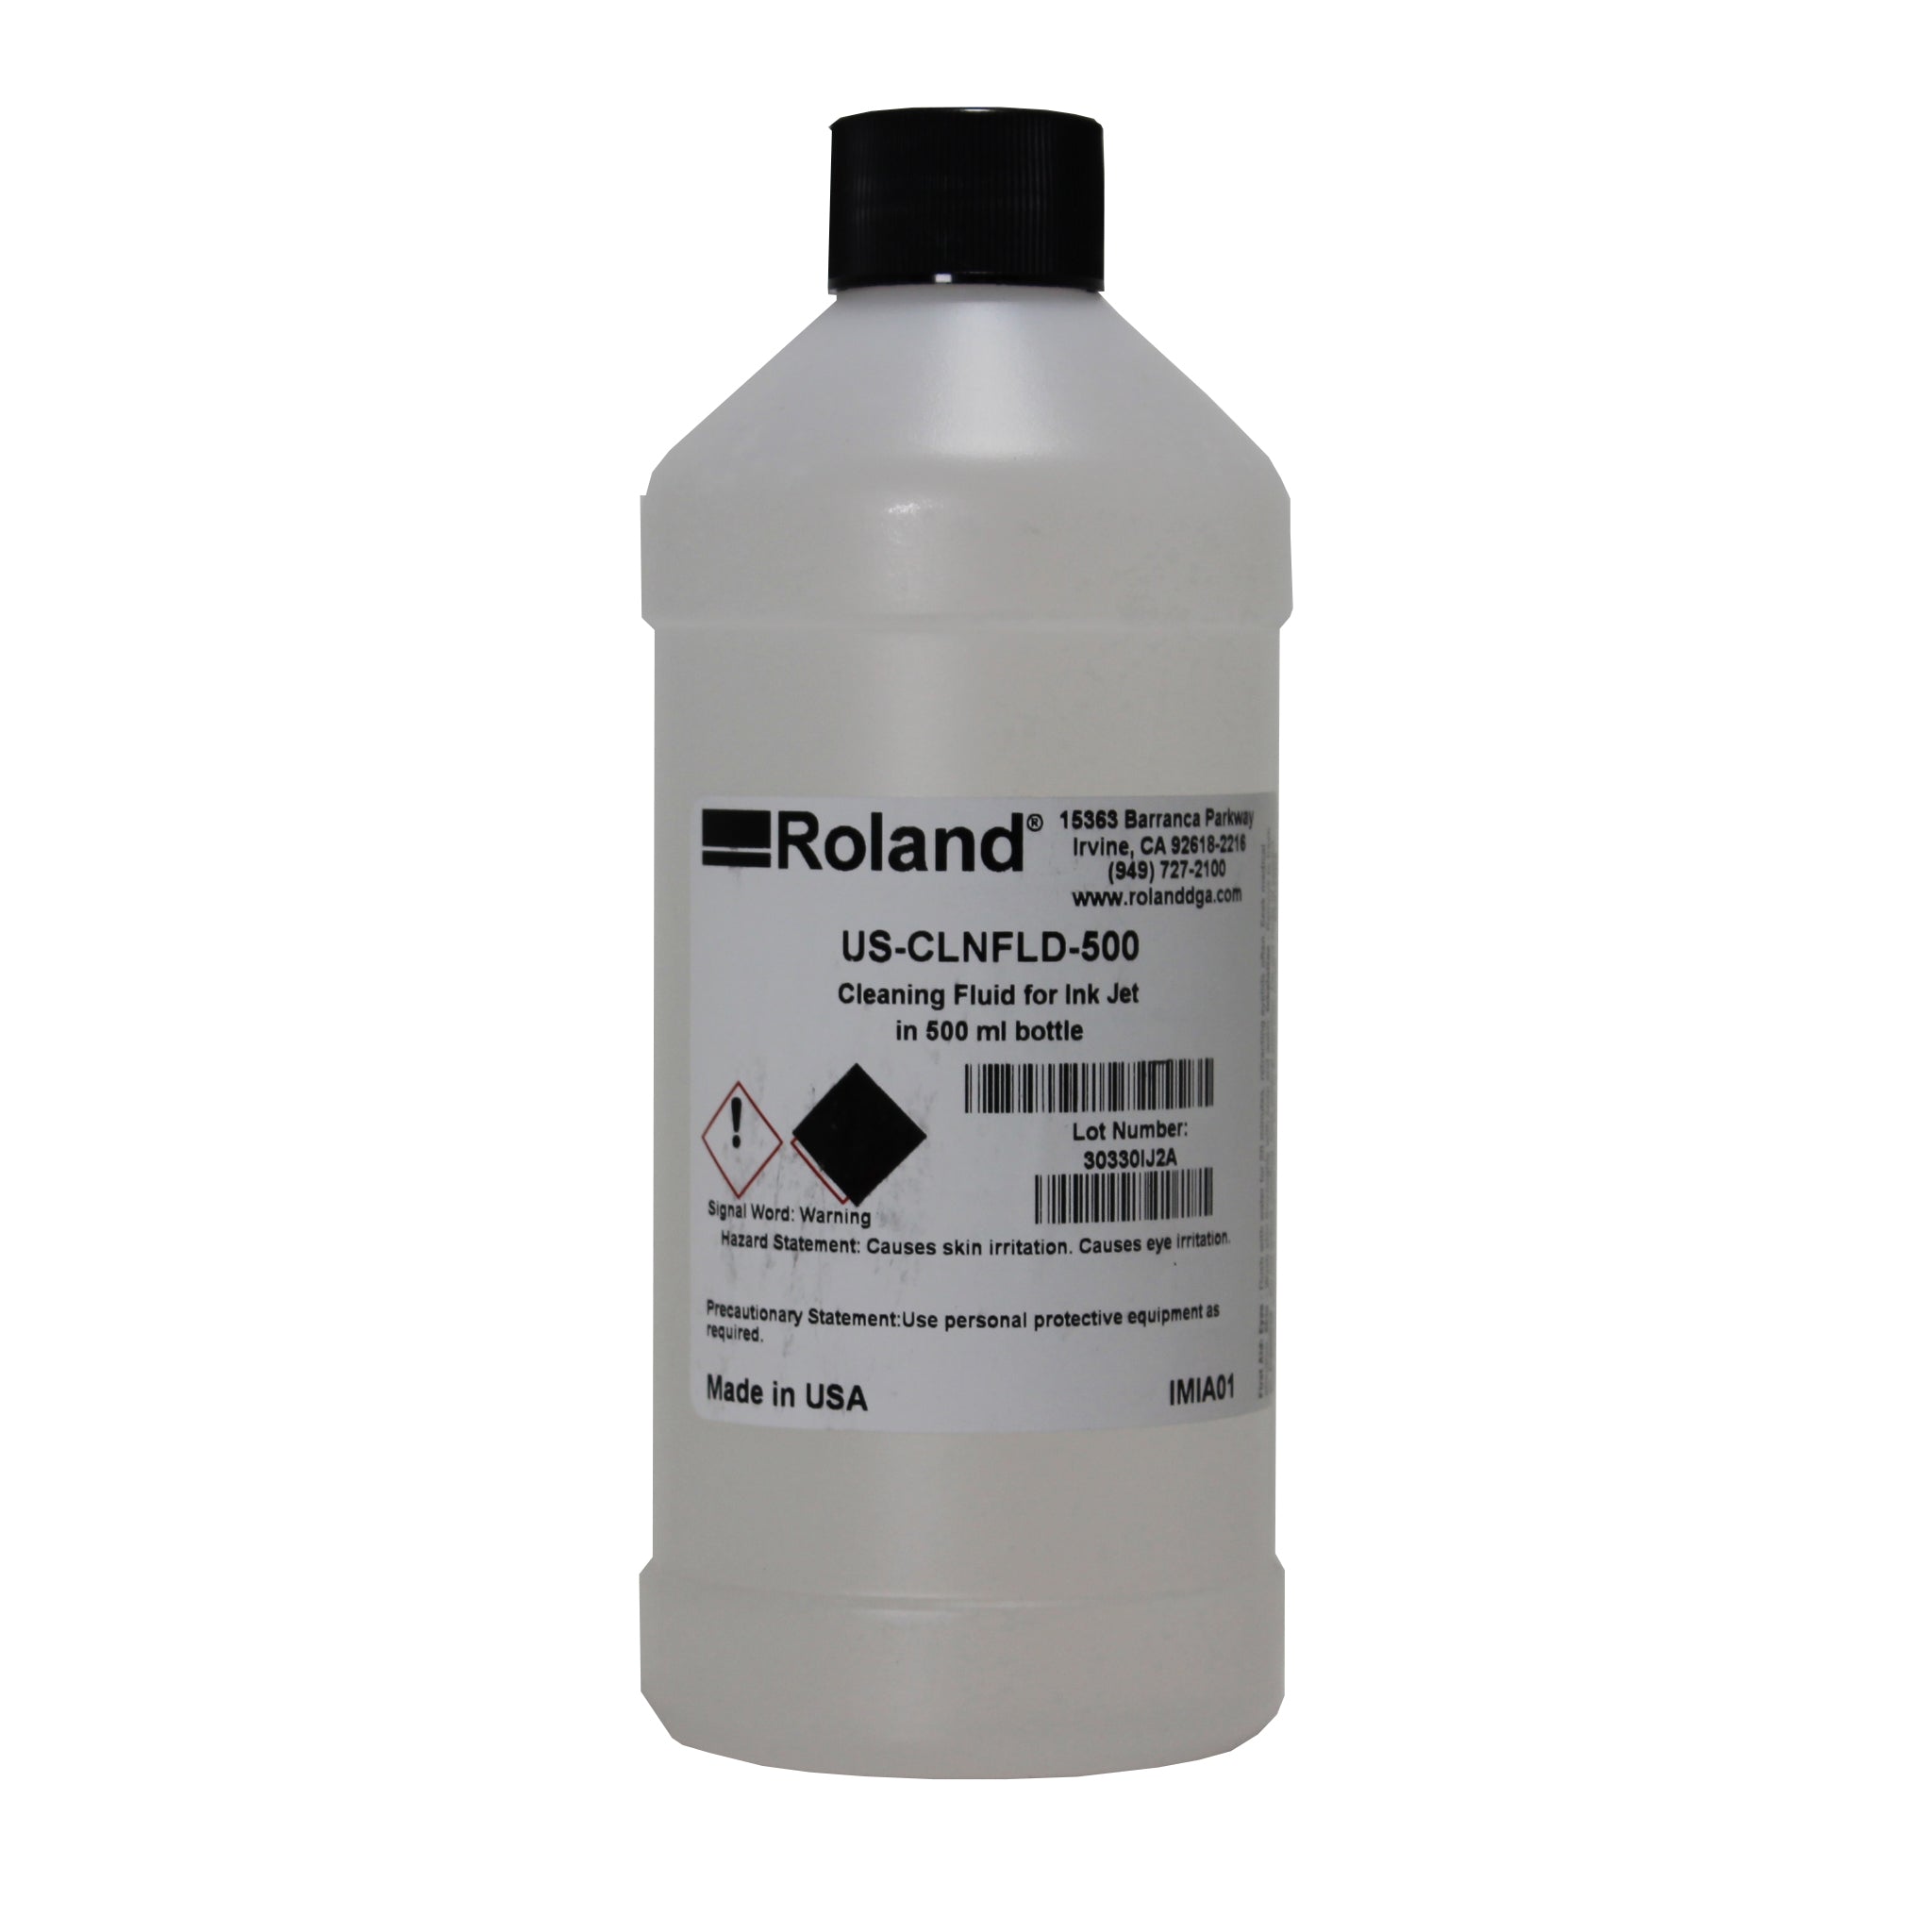 A bottle of Roland Cleaning Fluid for ink jet, 500ml 